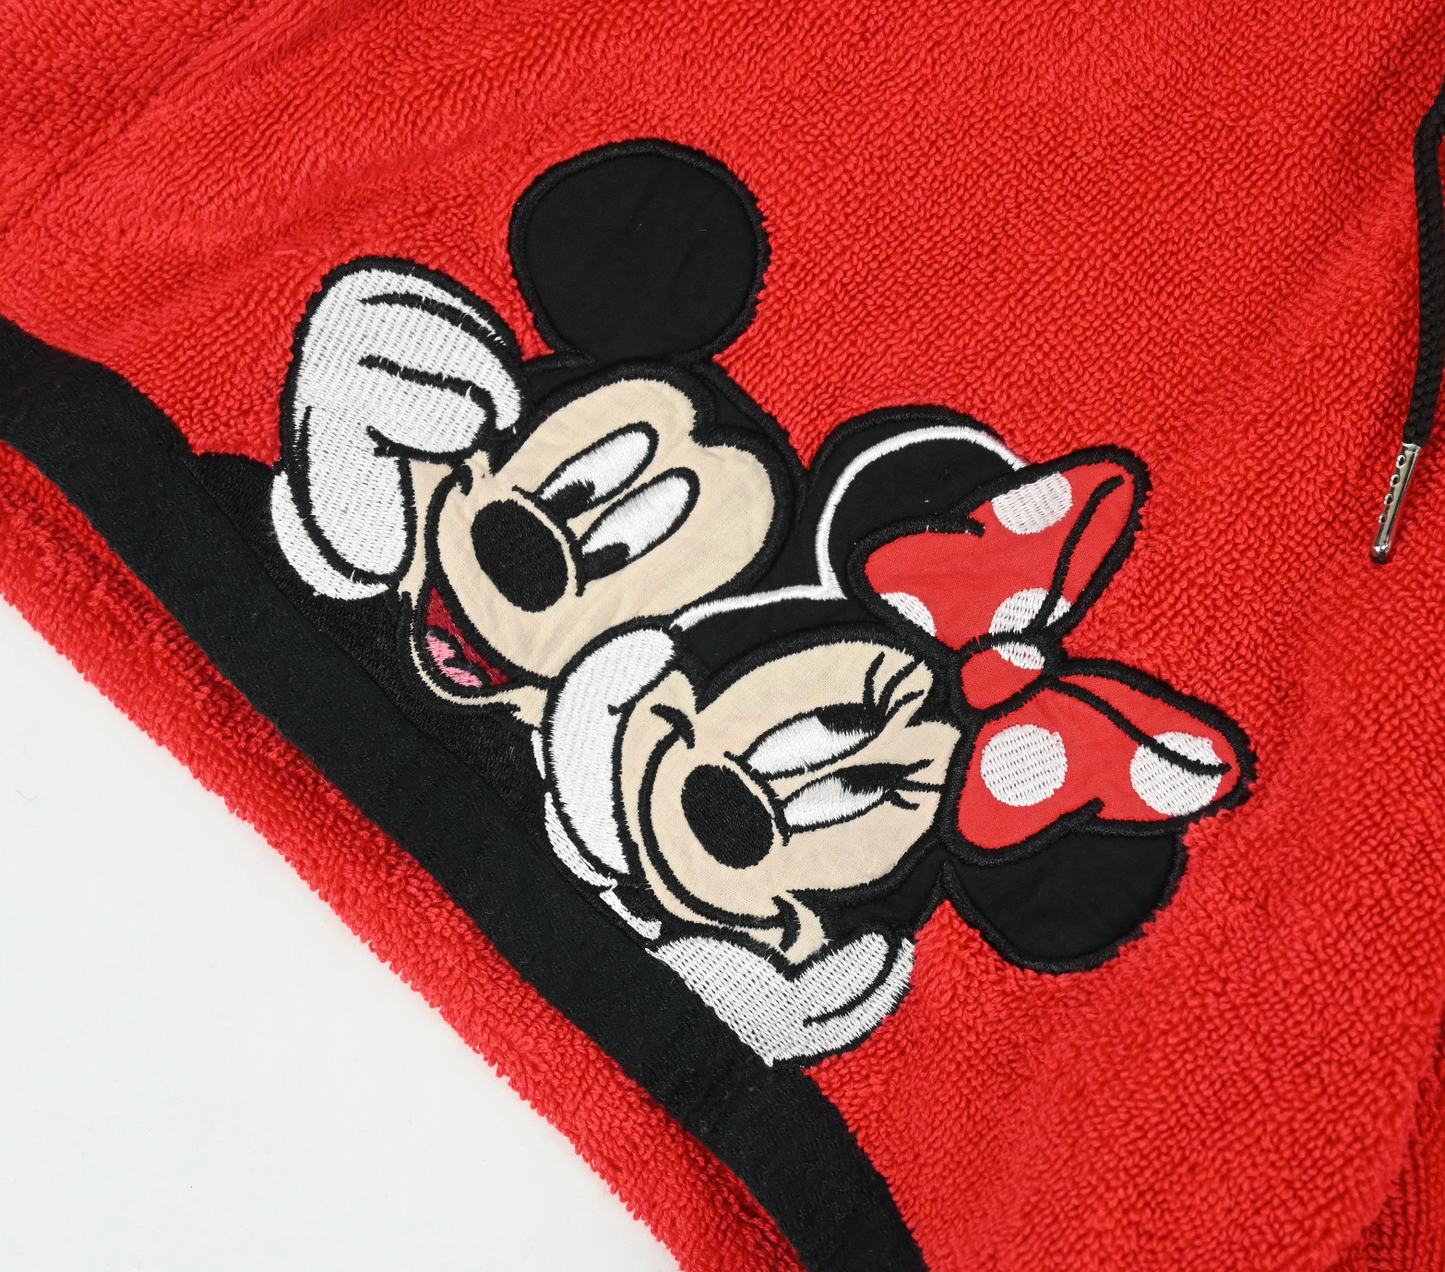 Shorts made with Vintage embroidered Disney towel